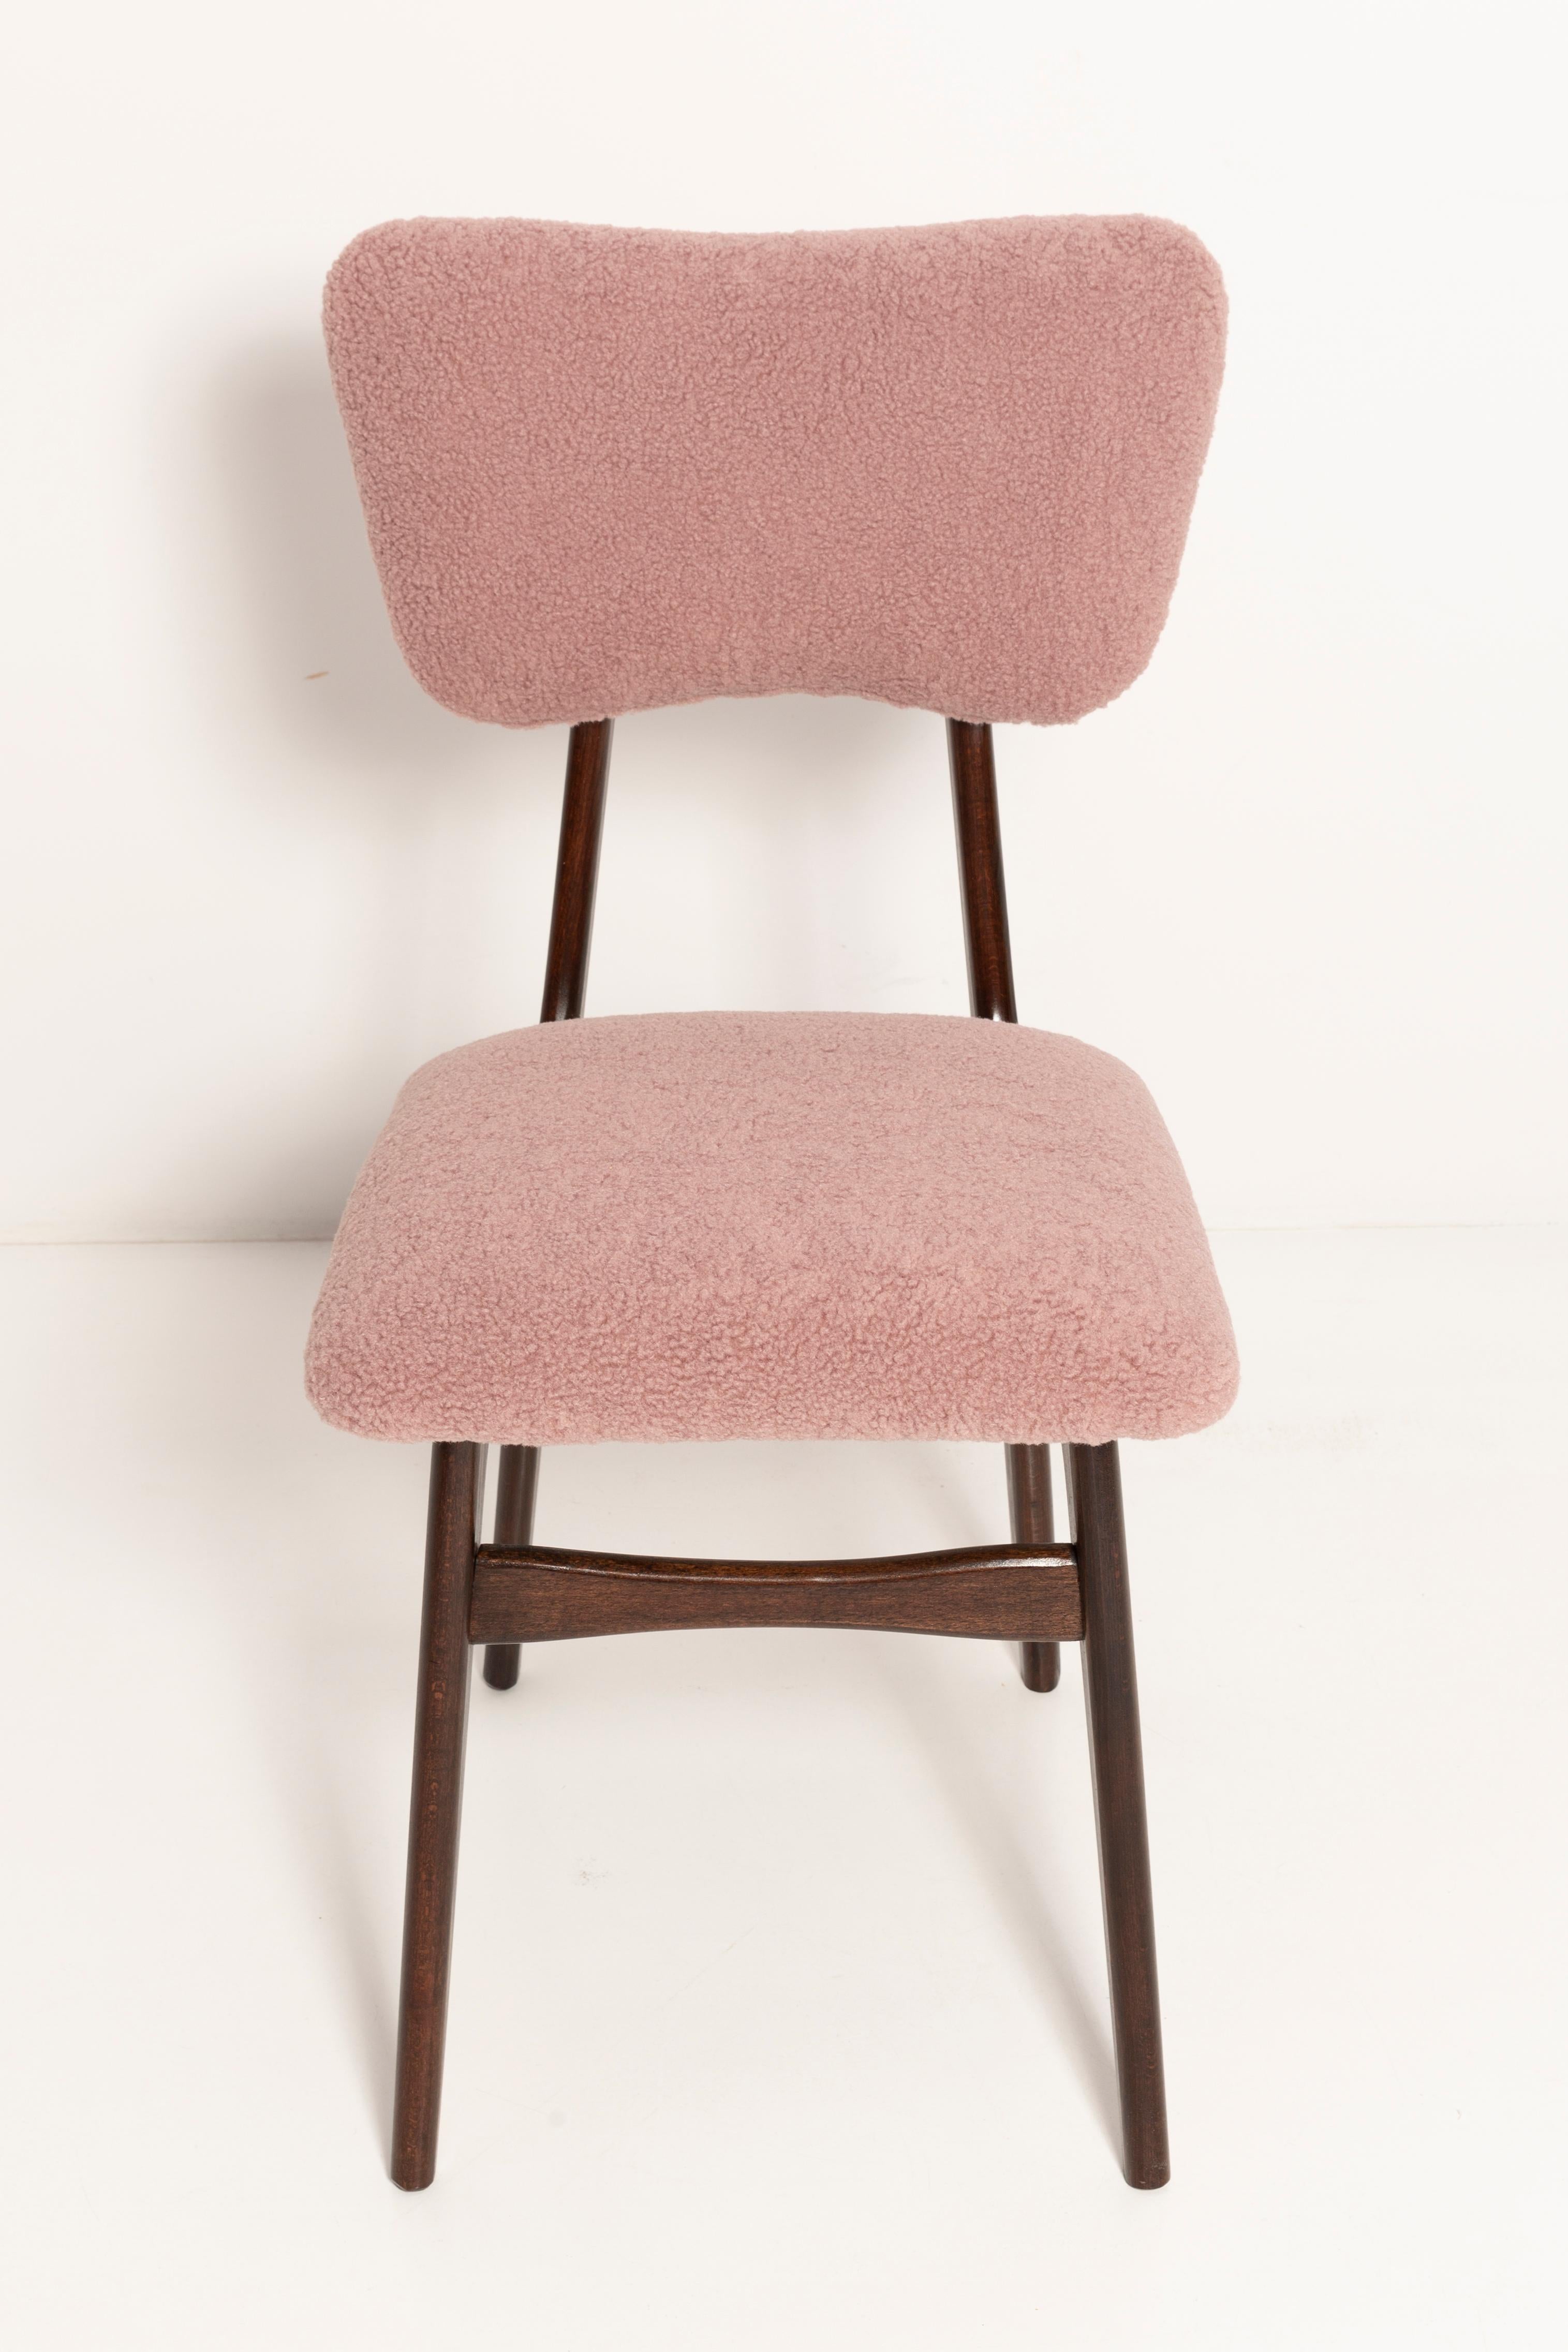 Set of Four Mid Century Butterfly Dining Chairs, Pink Boucle, Europe, 1960s For Sale 6